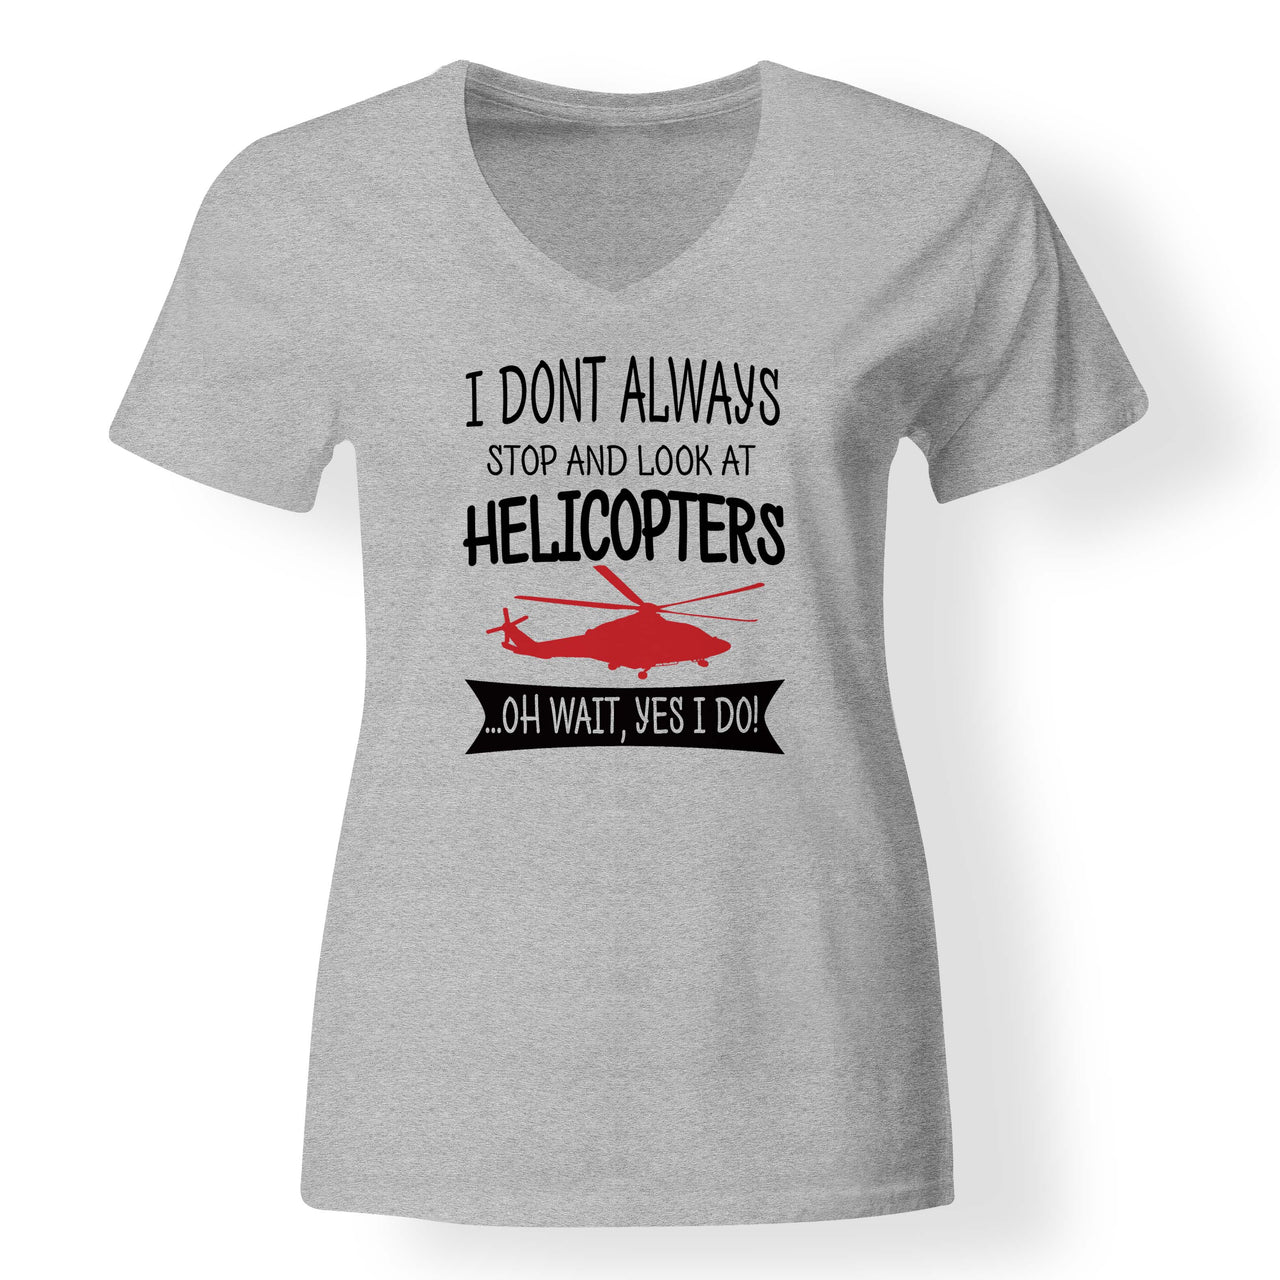 I Don't Always Stop and Look at Helicopters Designed V-Neck T-Shirts